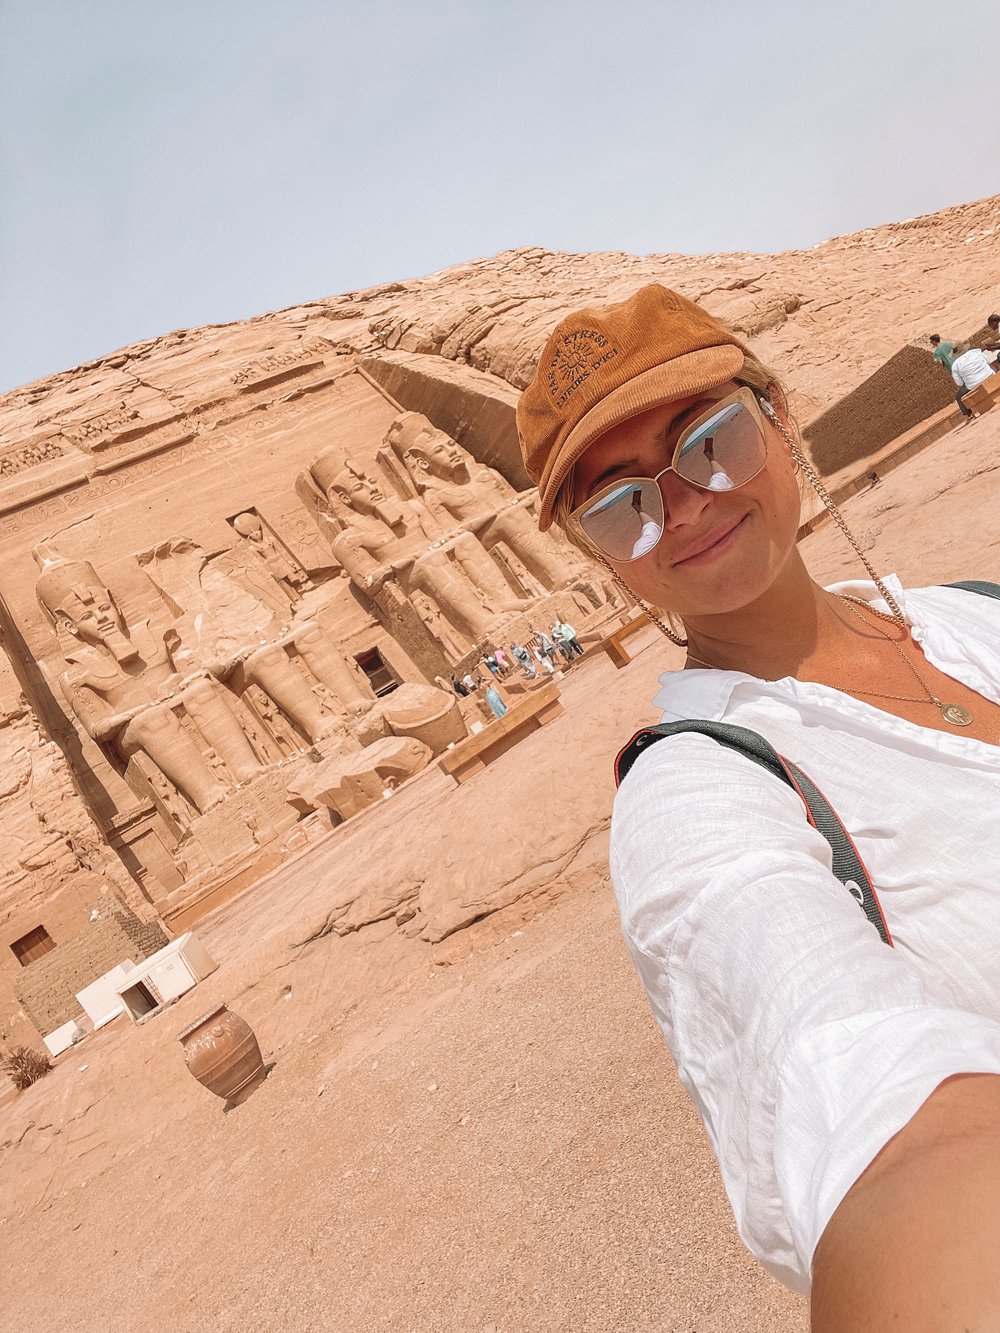 Selfie in front of the temple - Abu Simbel - Egypt